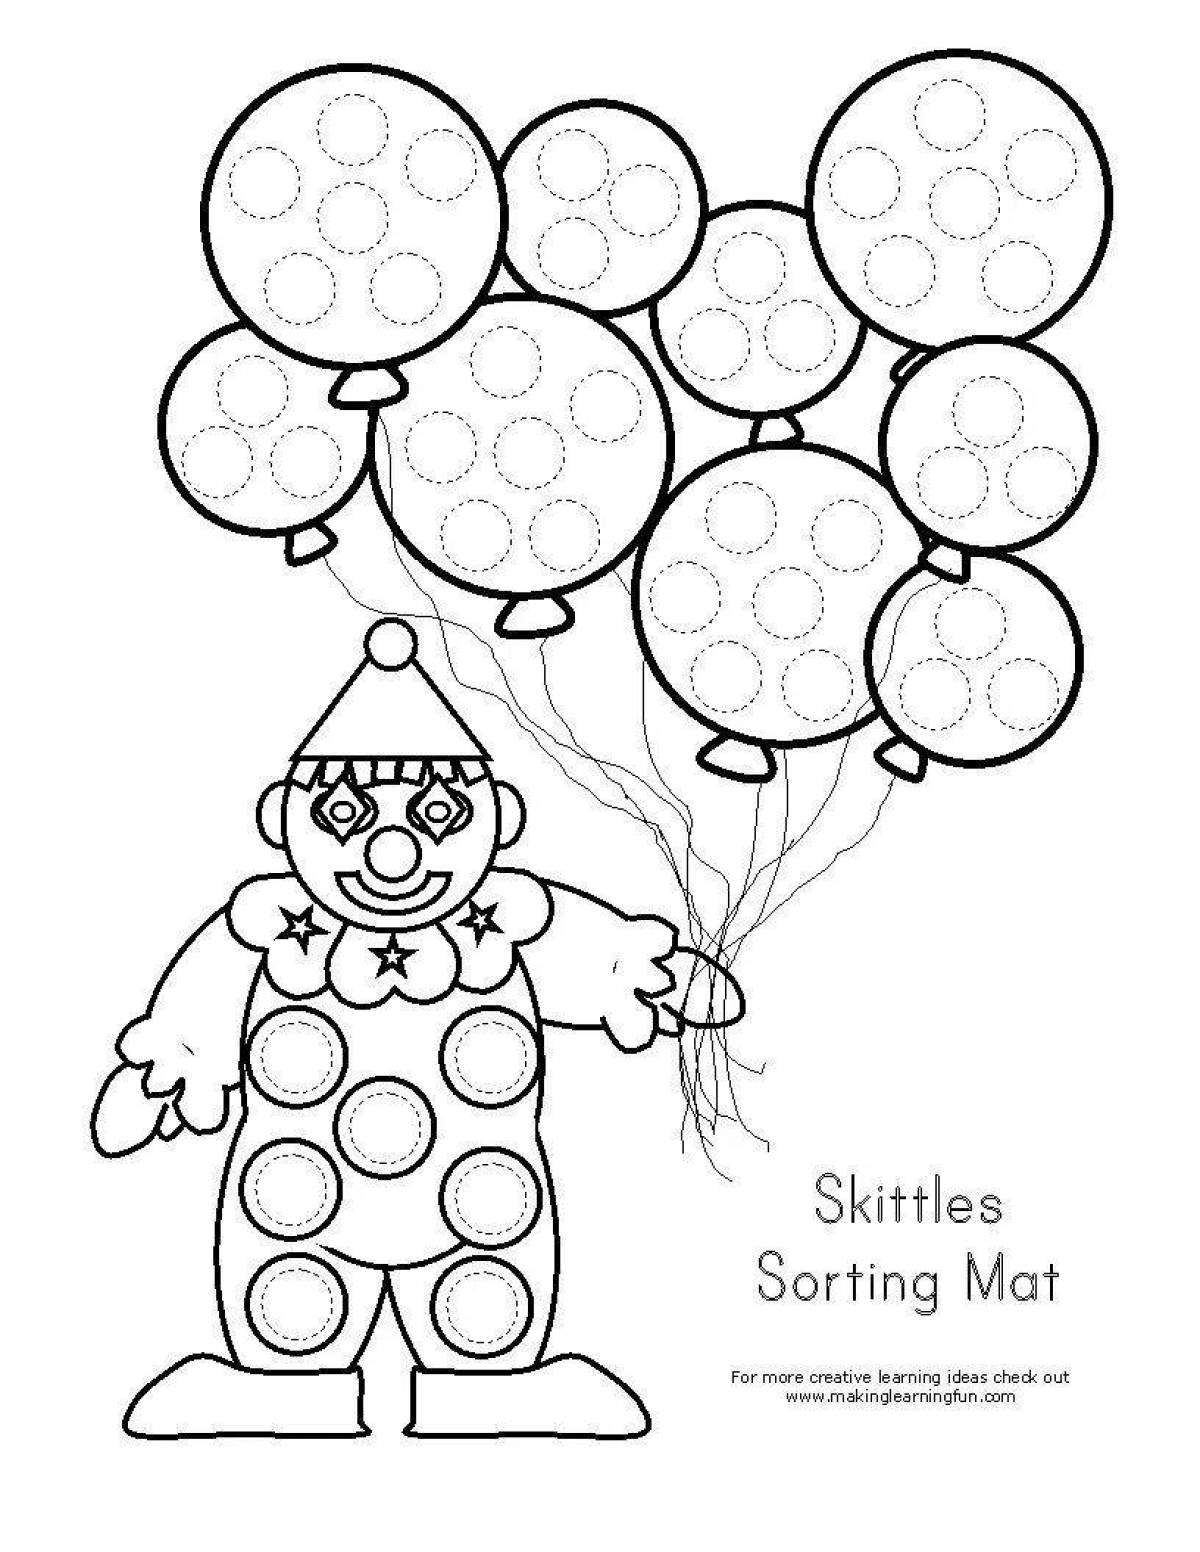 Joyful coloring pages for skittles